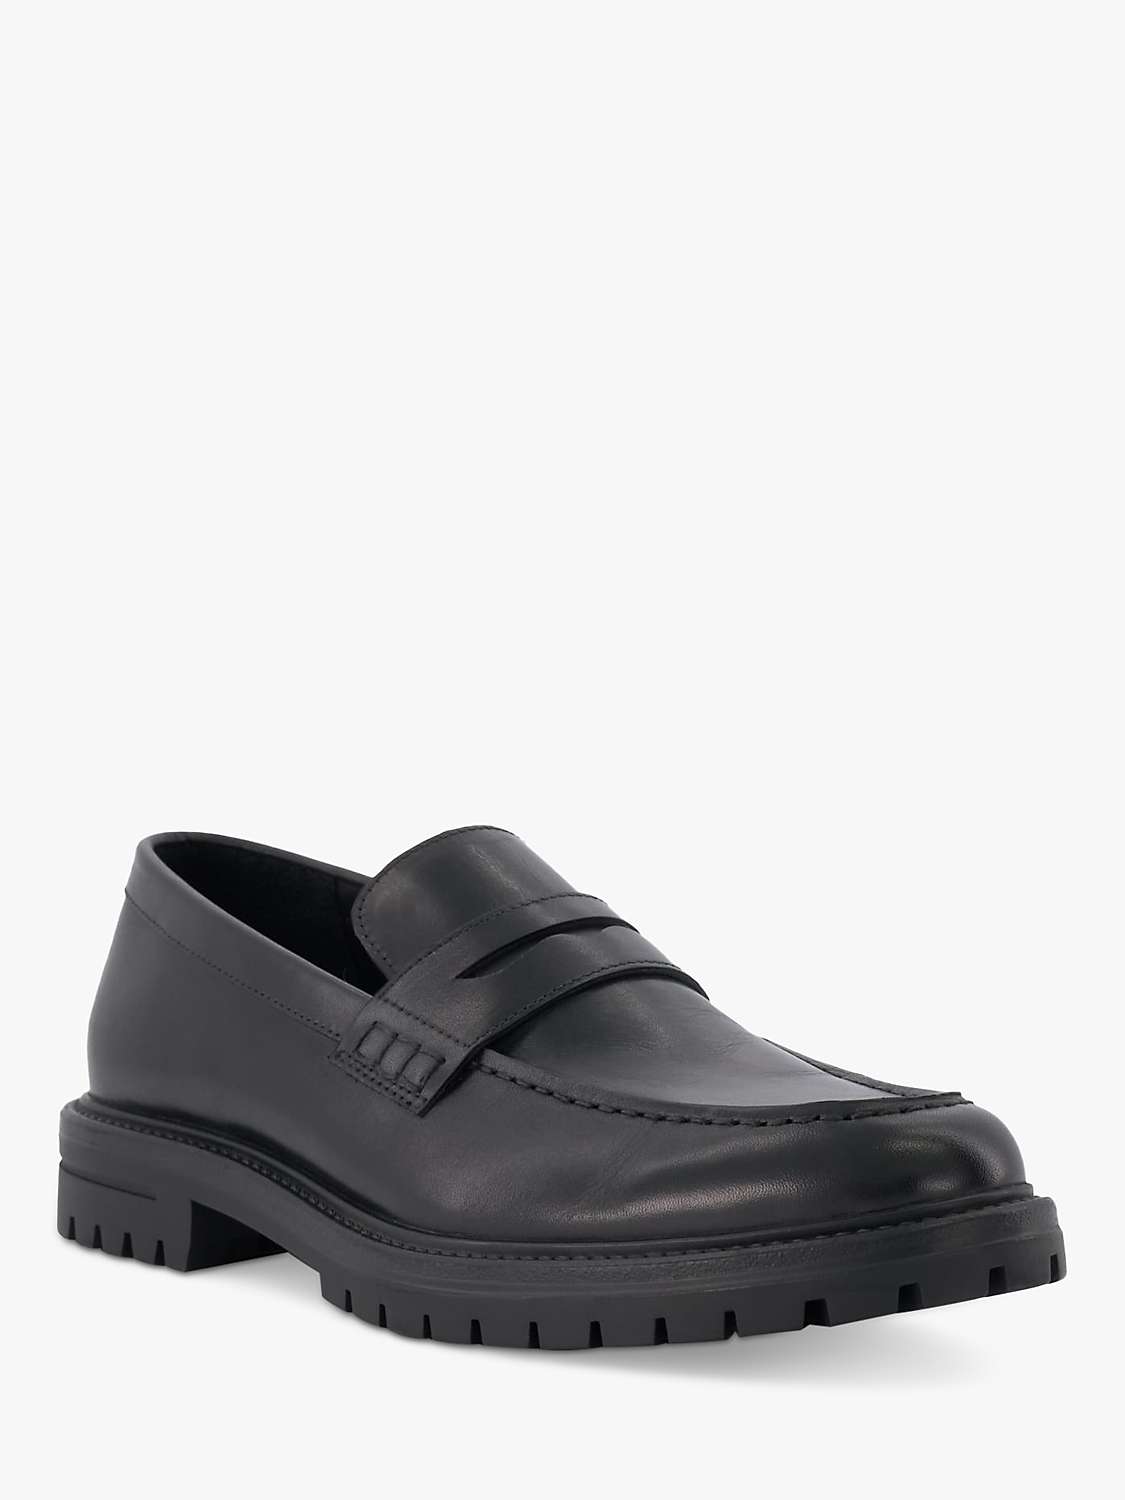 Buy Dune Banking Cleated Sole Penny Loafers Online at johnlewis.com